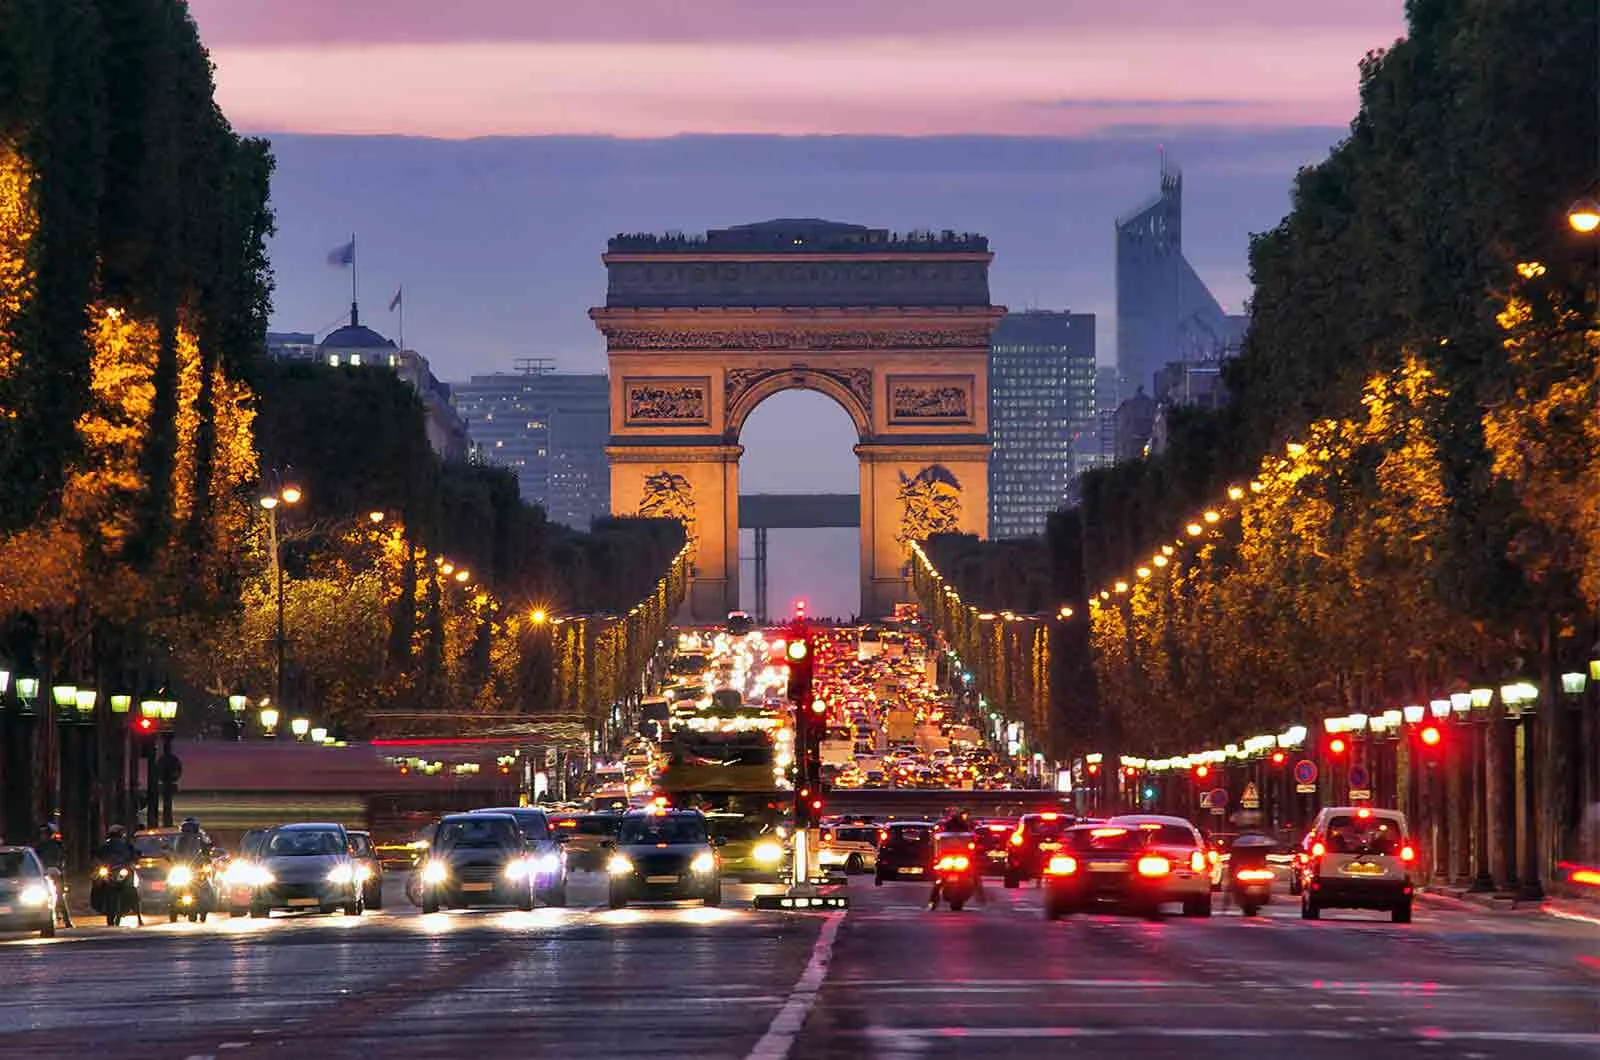 The Champs-Elysees in Paris at sunset, with cars on the way. Concept of English to French translators.